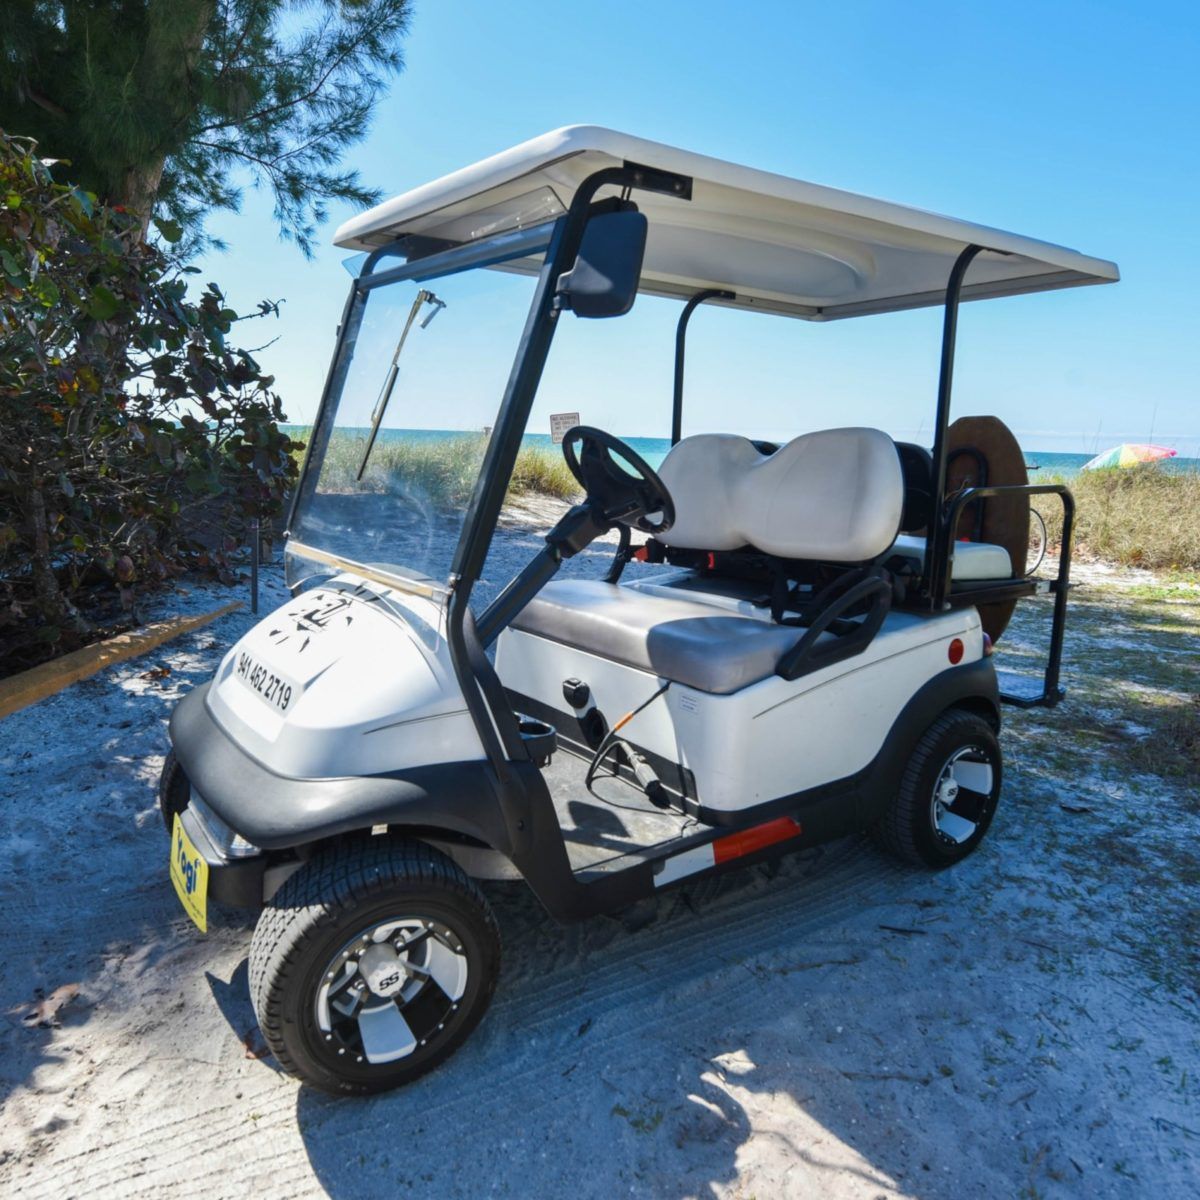 Forget walking, get around the island in style with our golf cart rentals! #LoveAMI #AnnaMariaIsland #BeachRetreat #IslandLife #GolfCart buff.ly/2Ft26kO